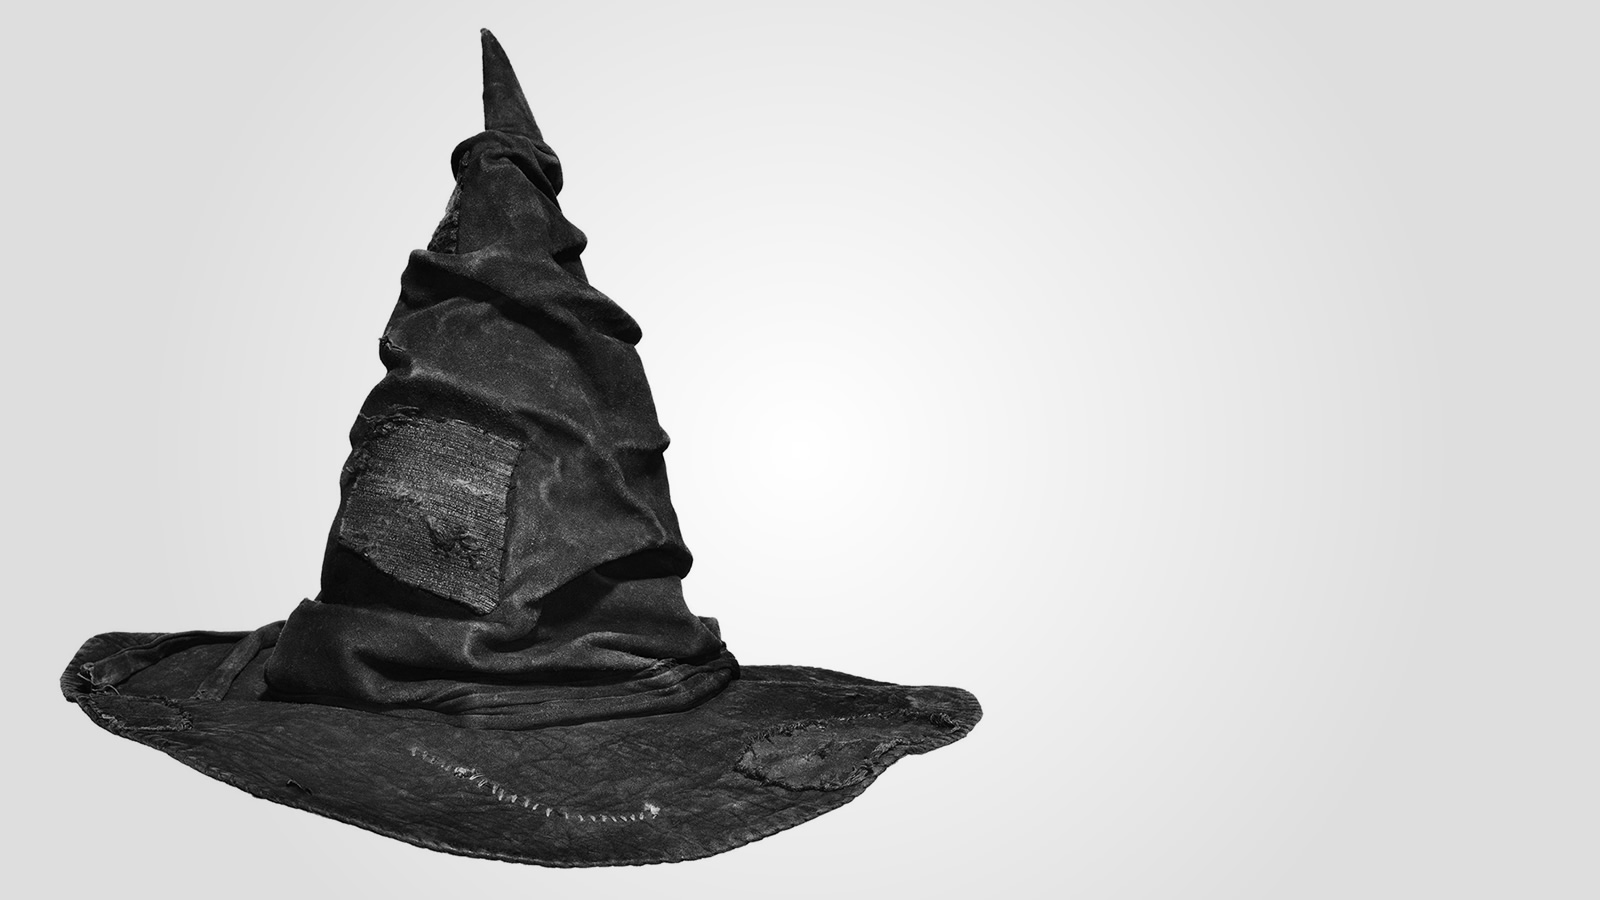 A rumpled wizard's hat